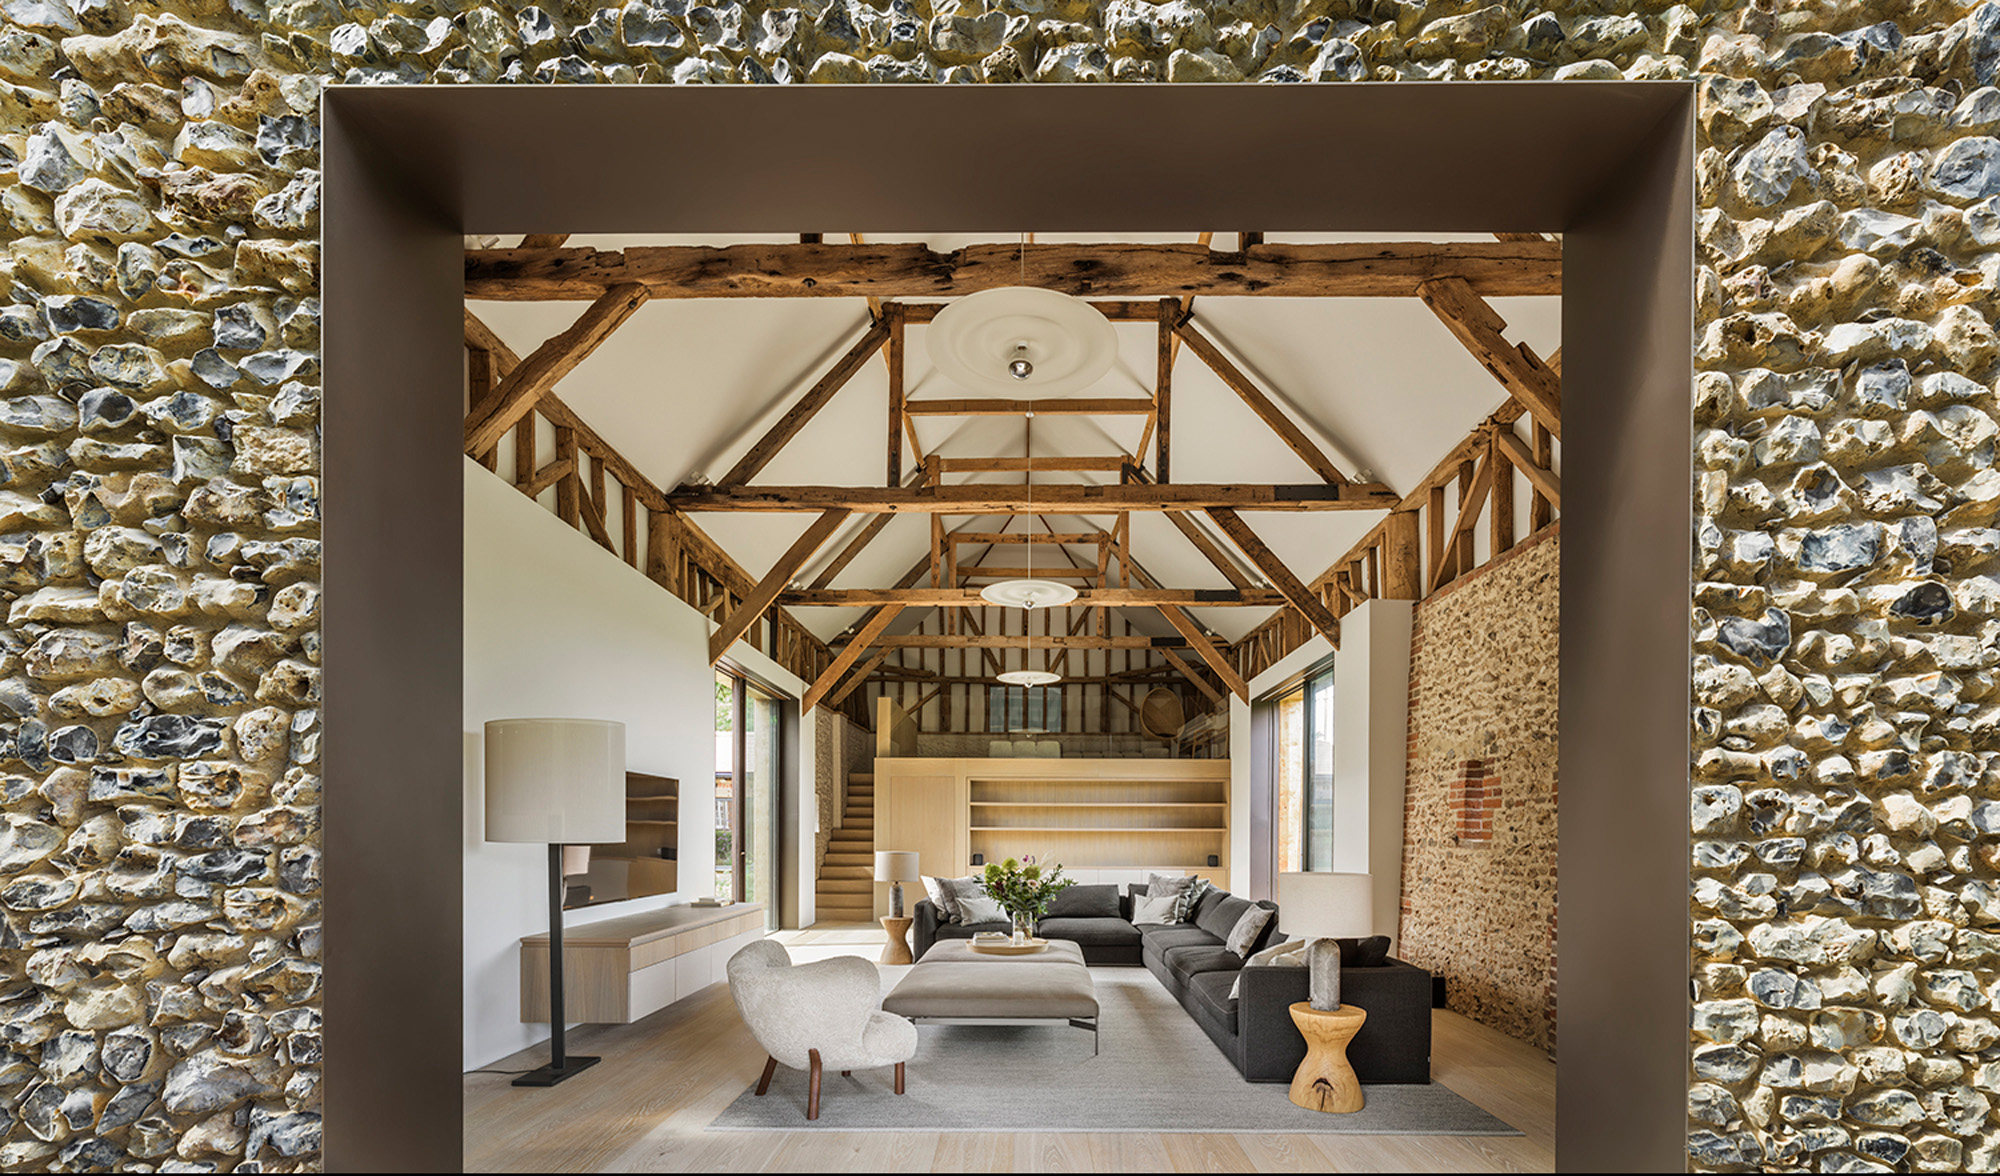 Interior at Sevenoaks by by Gregory Phillips Architects - luxury architects in London